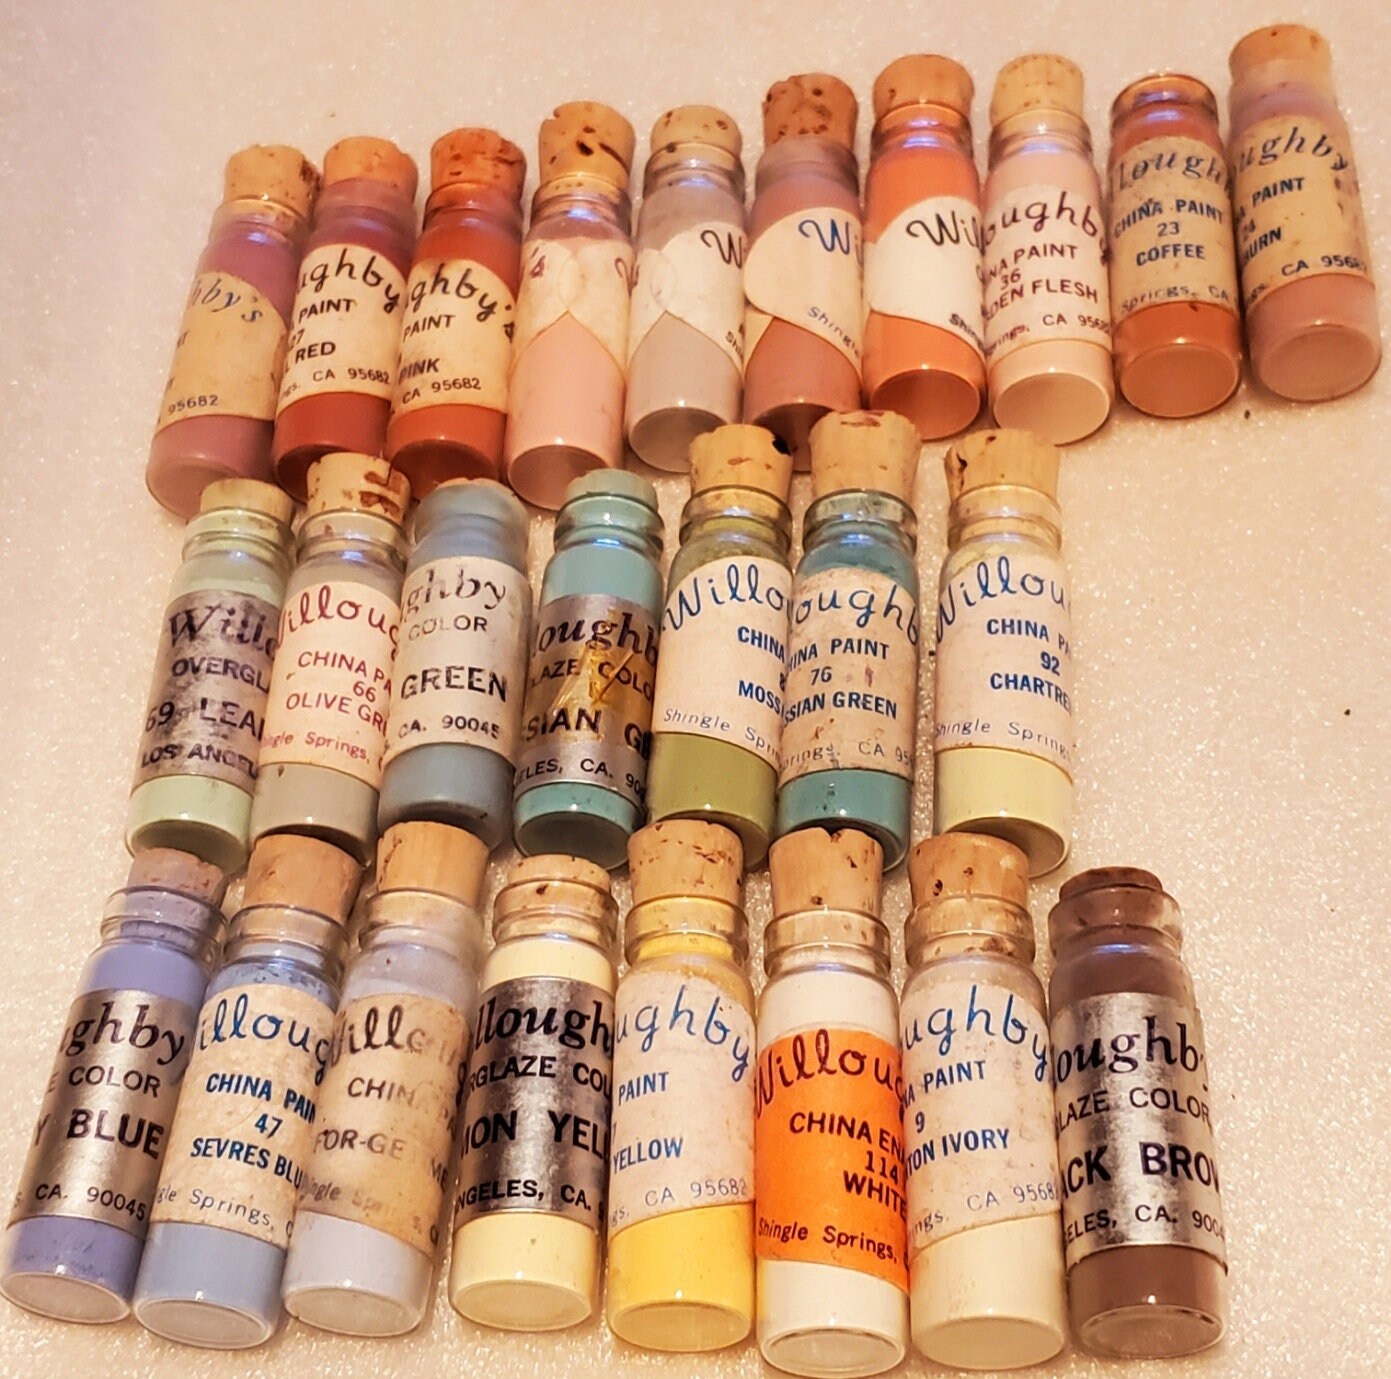 Vintage Willoughby's China Dry Powder Paint Lot of 4 P-1 / 25